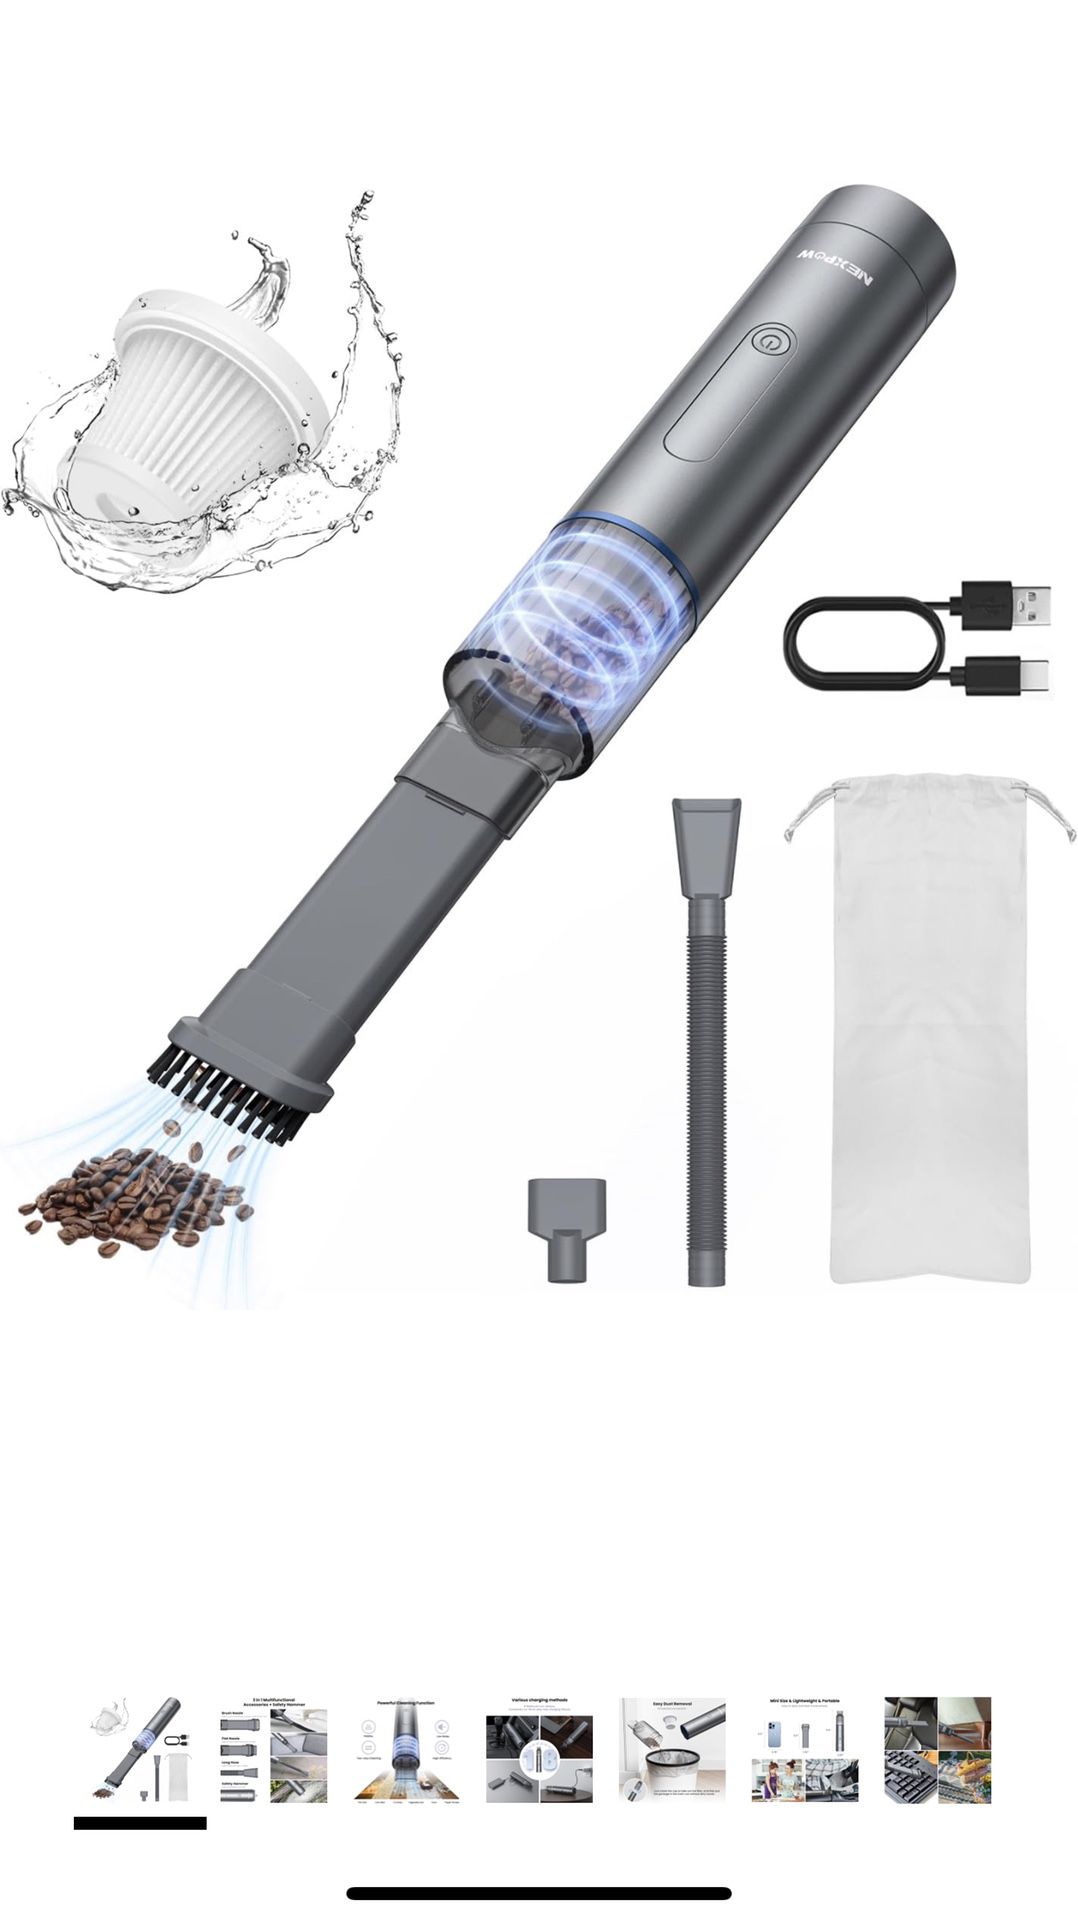 Car Vacuum, Portable 7000PA Handheld Vacuum Cleaner with High Power, Mini Hand Vacuum with 7500 mAh Battery, 1.58Lbs Compact Electric Cordless Vacuum 